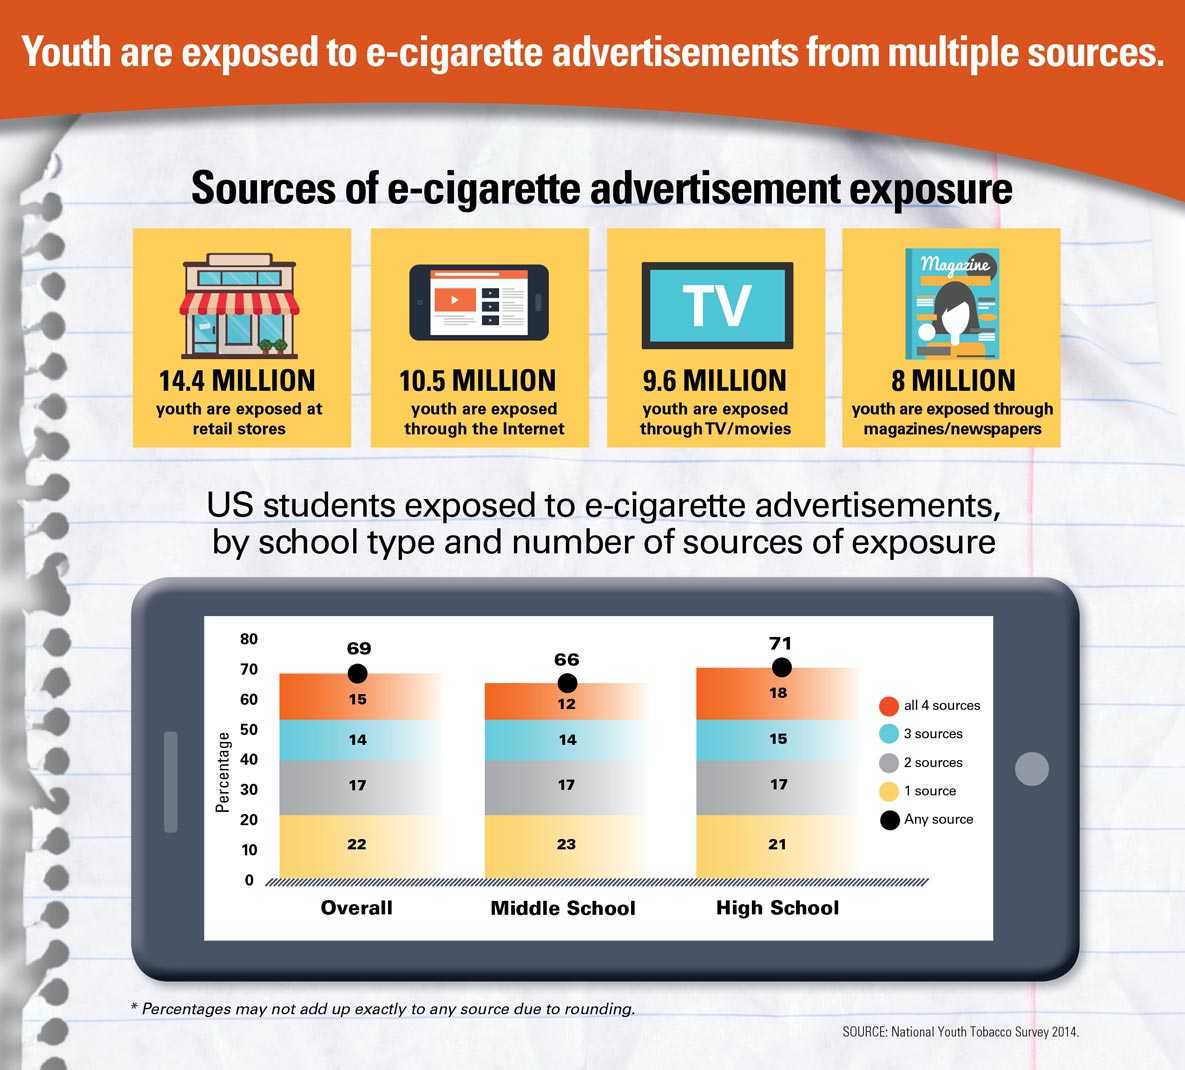 Graphic: Youth are exposed to e-cigarette advertisements from multiple sources.